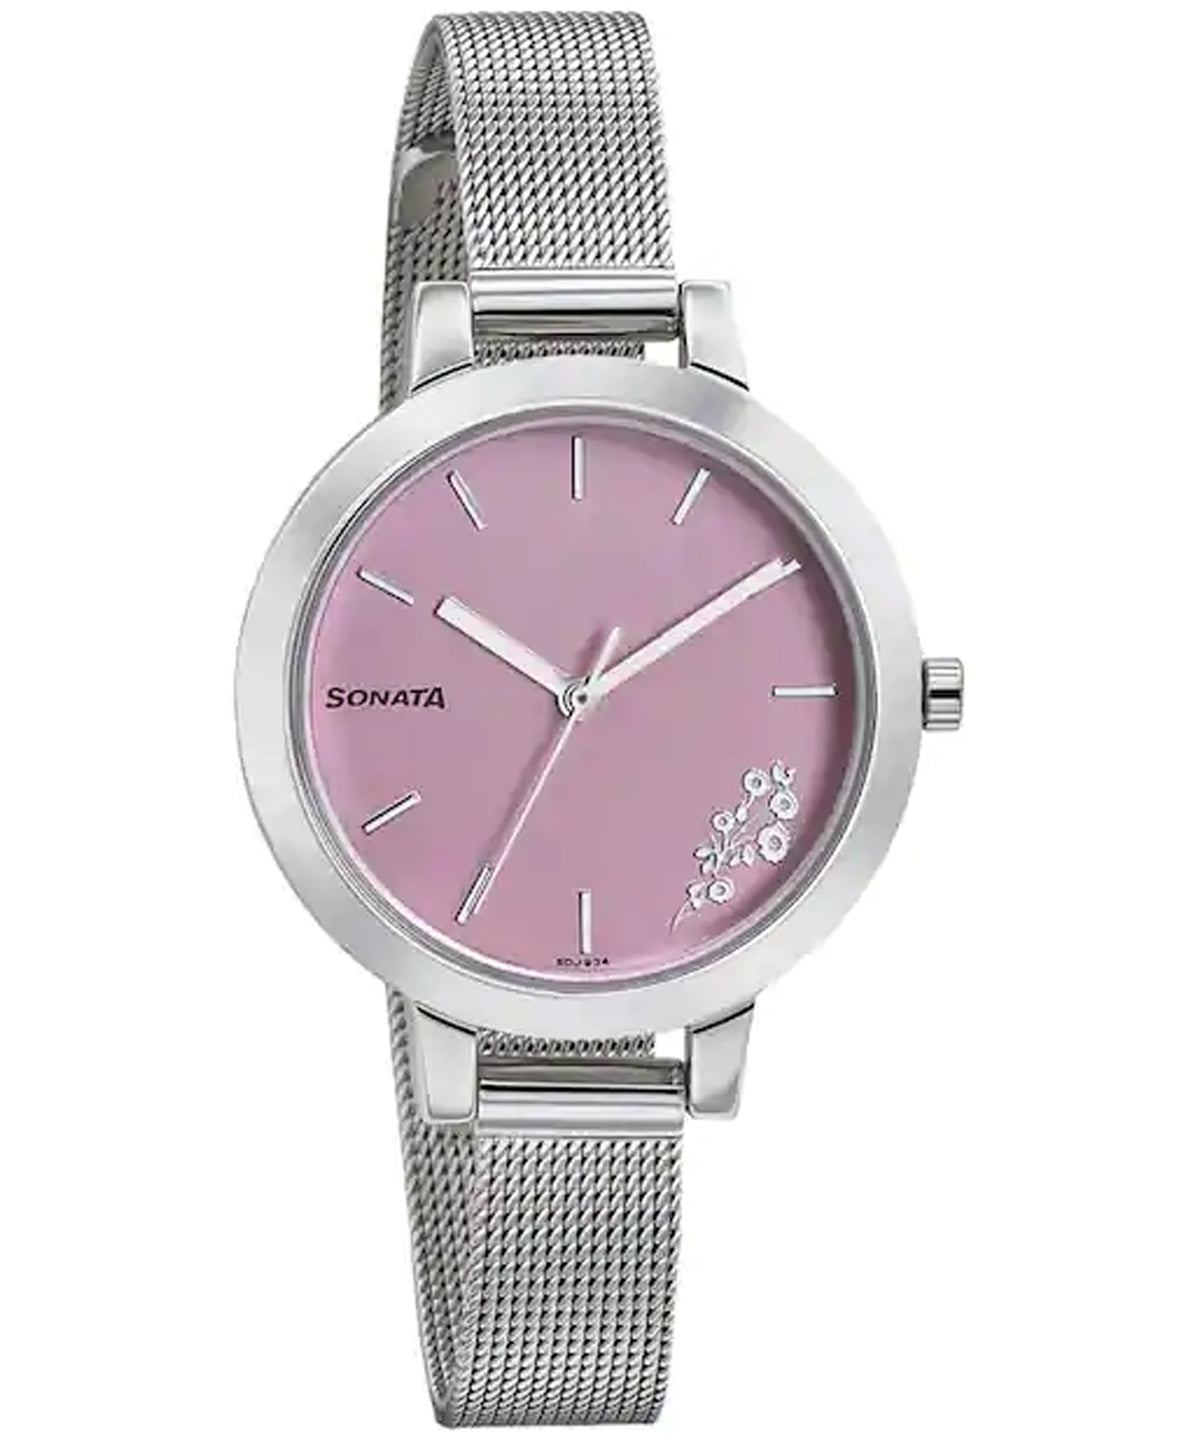 Sonata Women's Pink Dial Silver Stainless Steel Strap Watch, 8141SM12